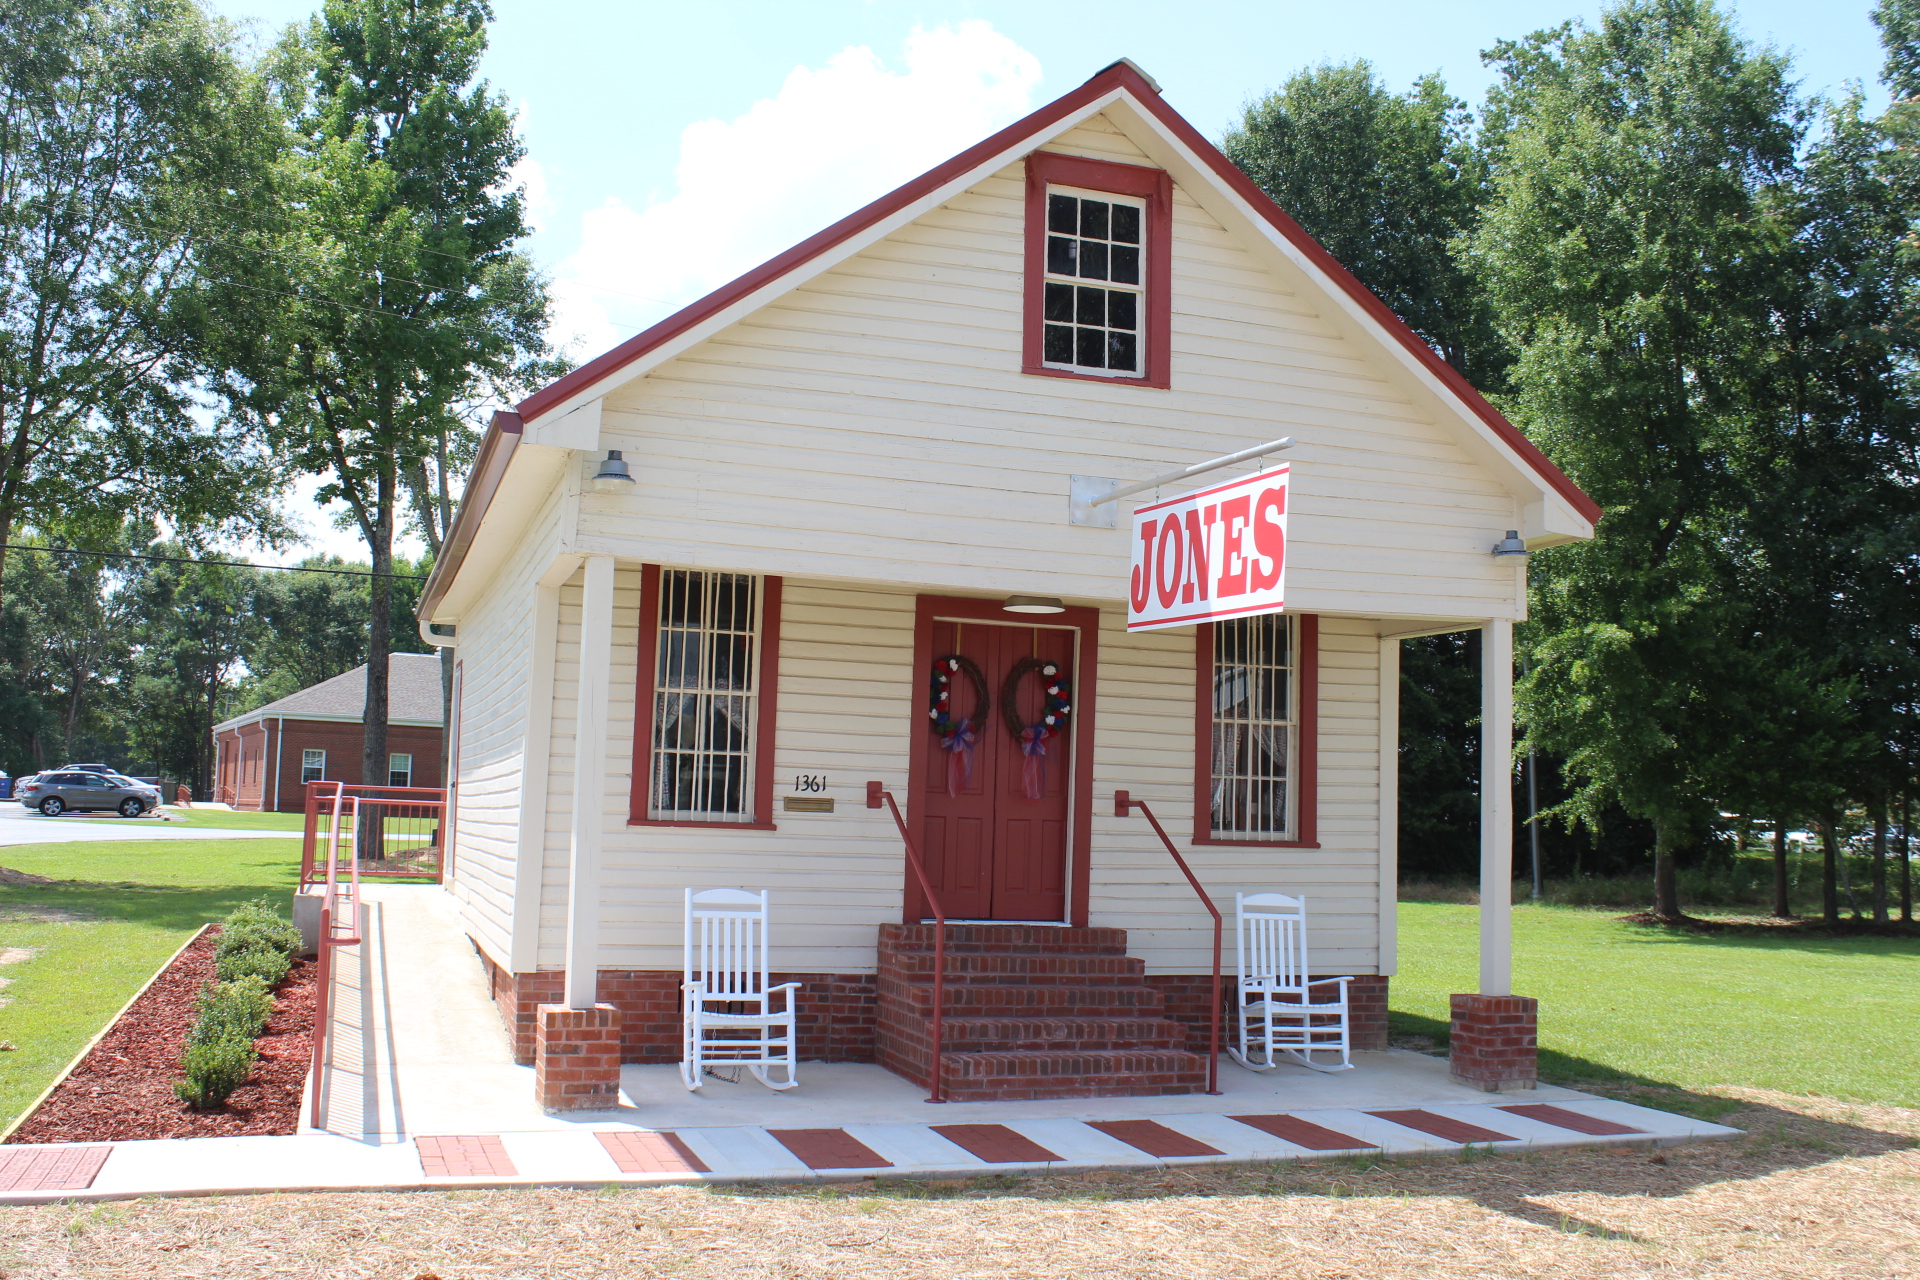 City of Smiths Station to hold grand opening of Historic Jones Store Museum July 13